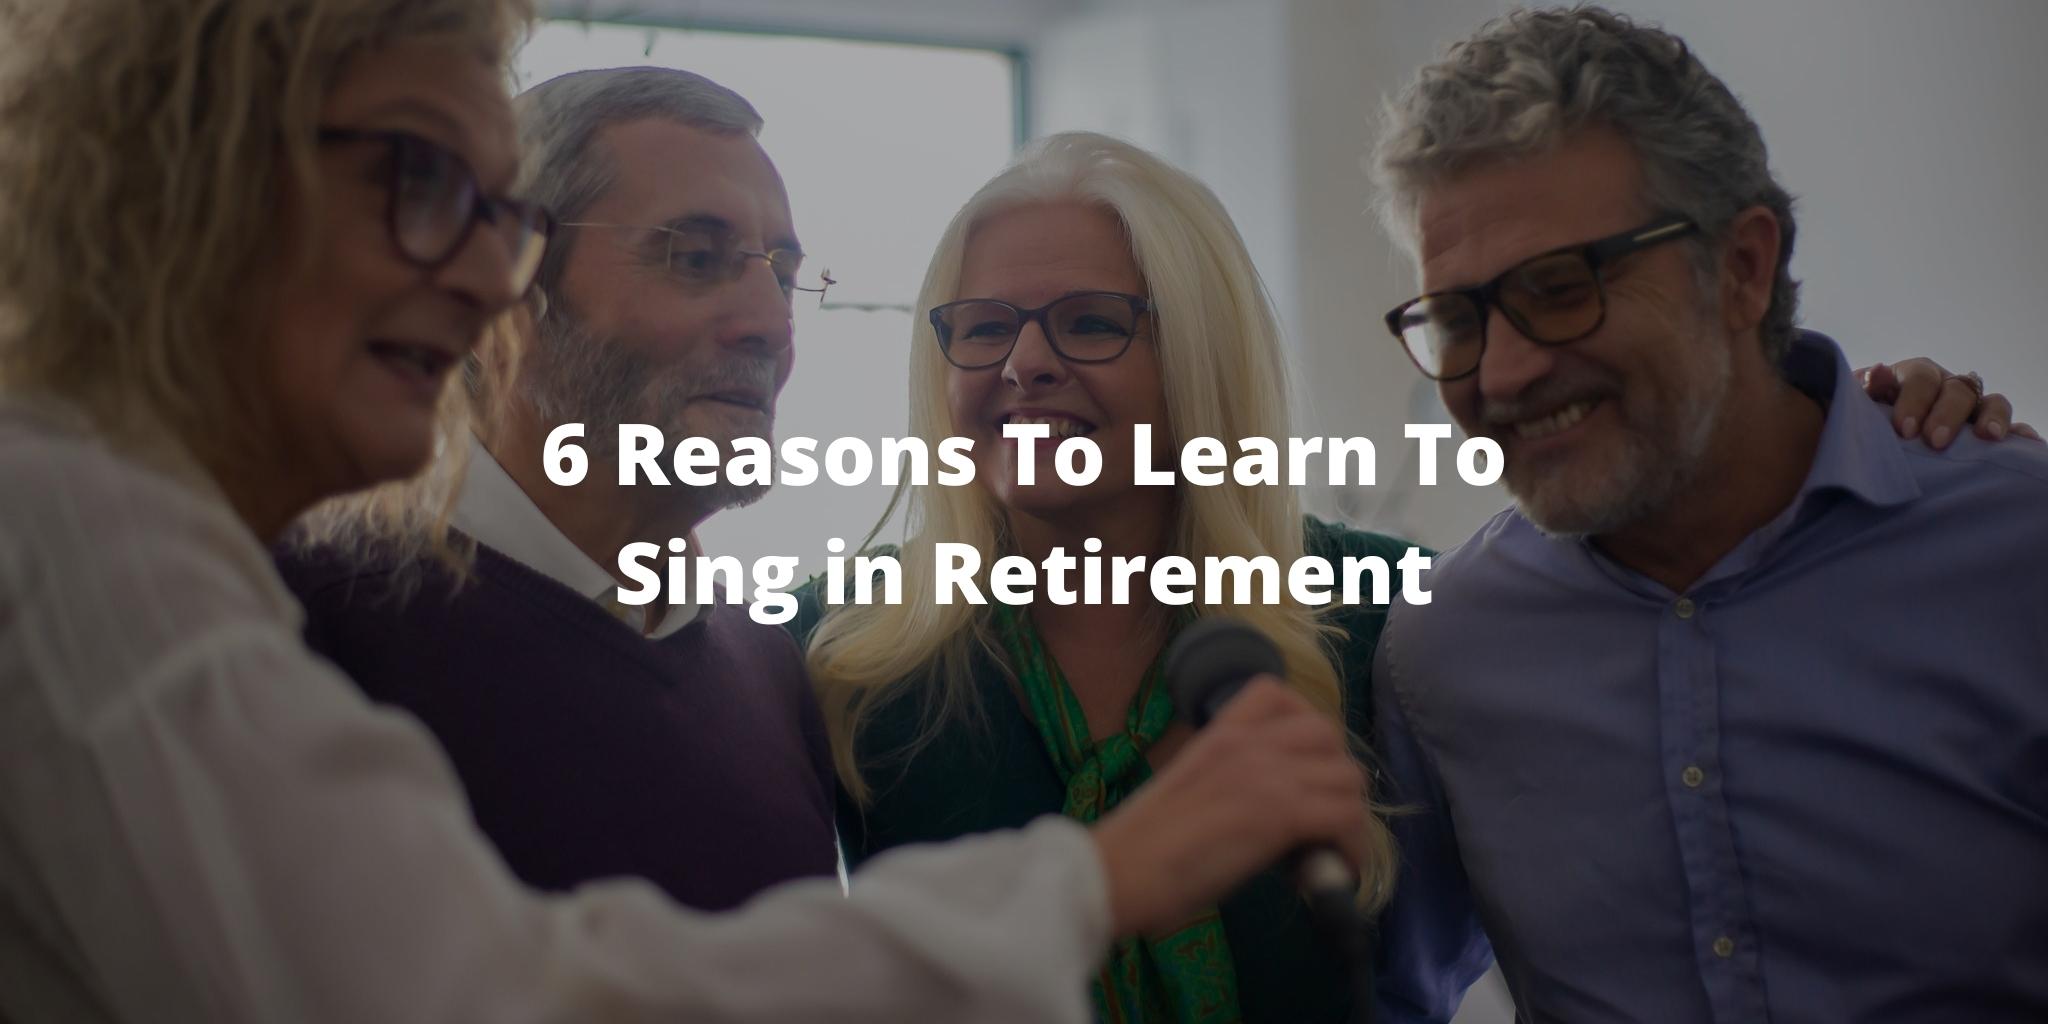 6 Reasons To Learn To Sing in Retirement